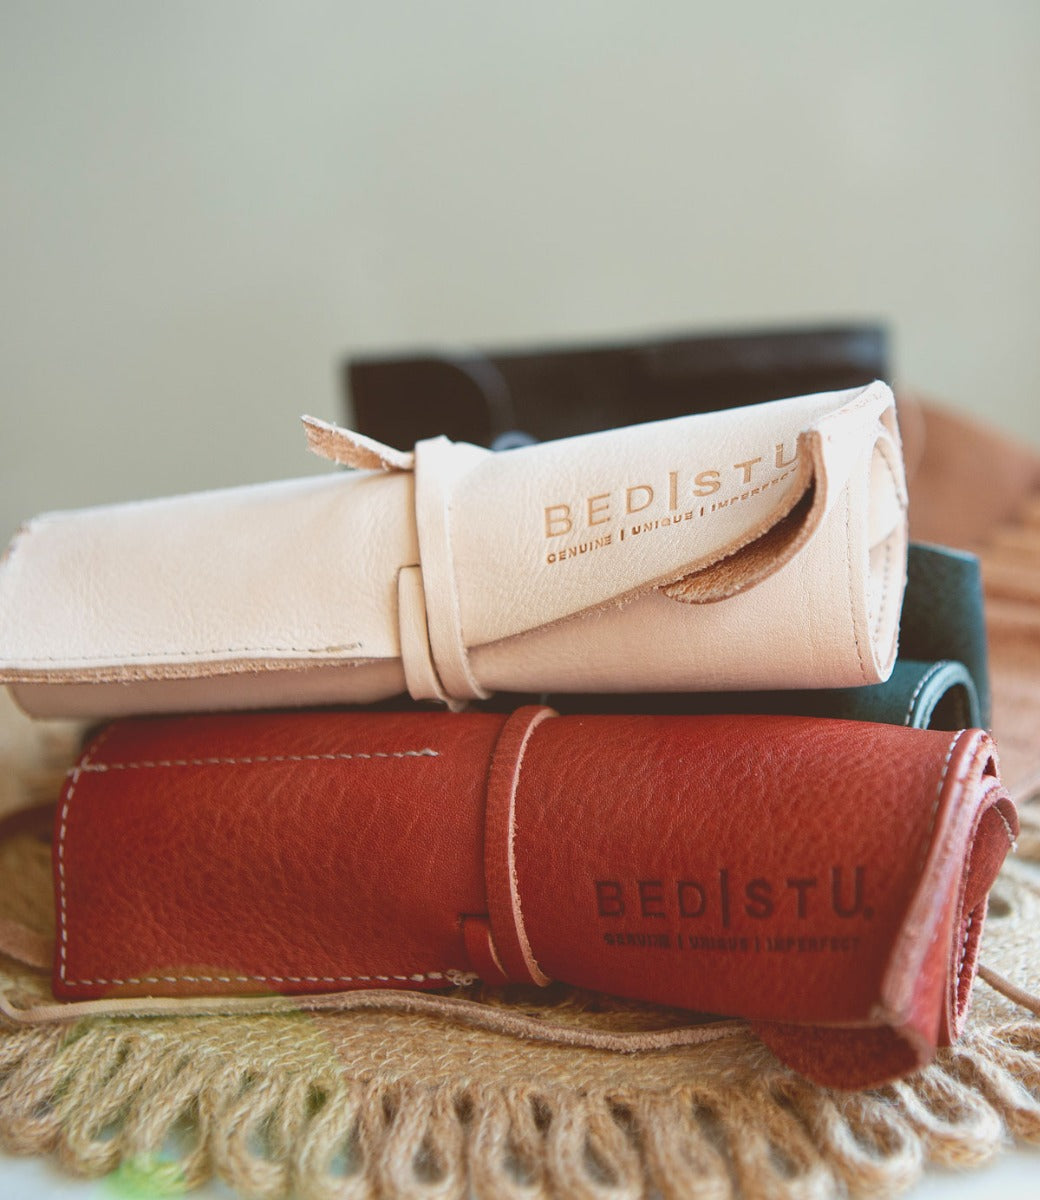 Three Prepped Leather Wraps with embossed "Bed Stu" branding are stacked, featuring colors in light pink, black, and red. The artist tools rest on a textured woven surface, evoking the craftsmanship of a Leather Shoppe.